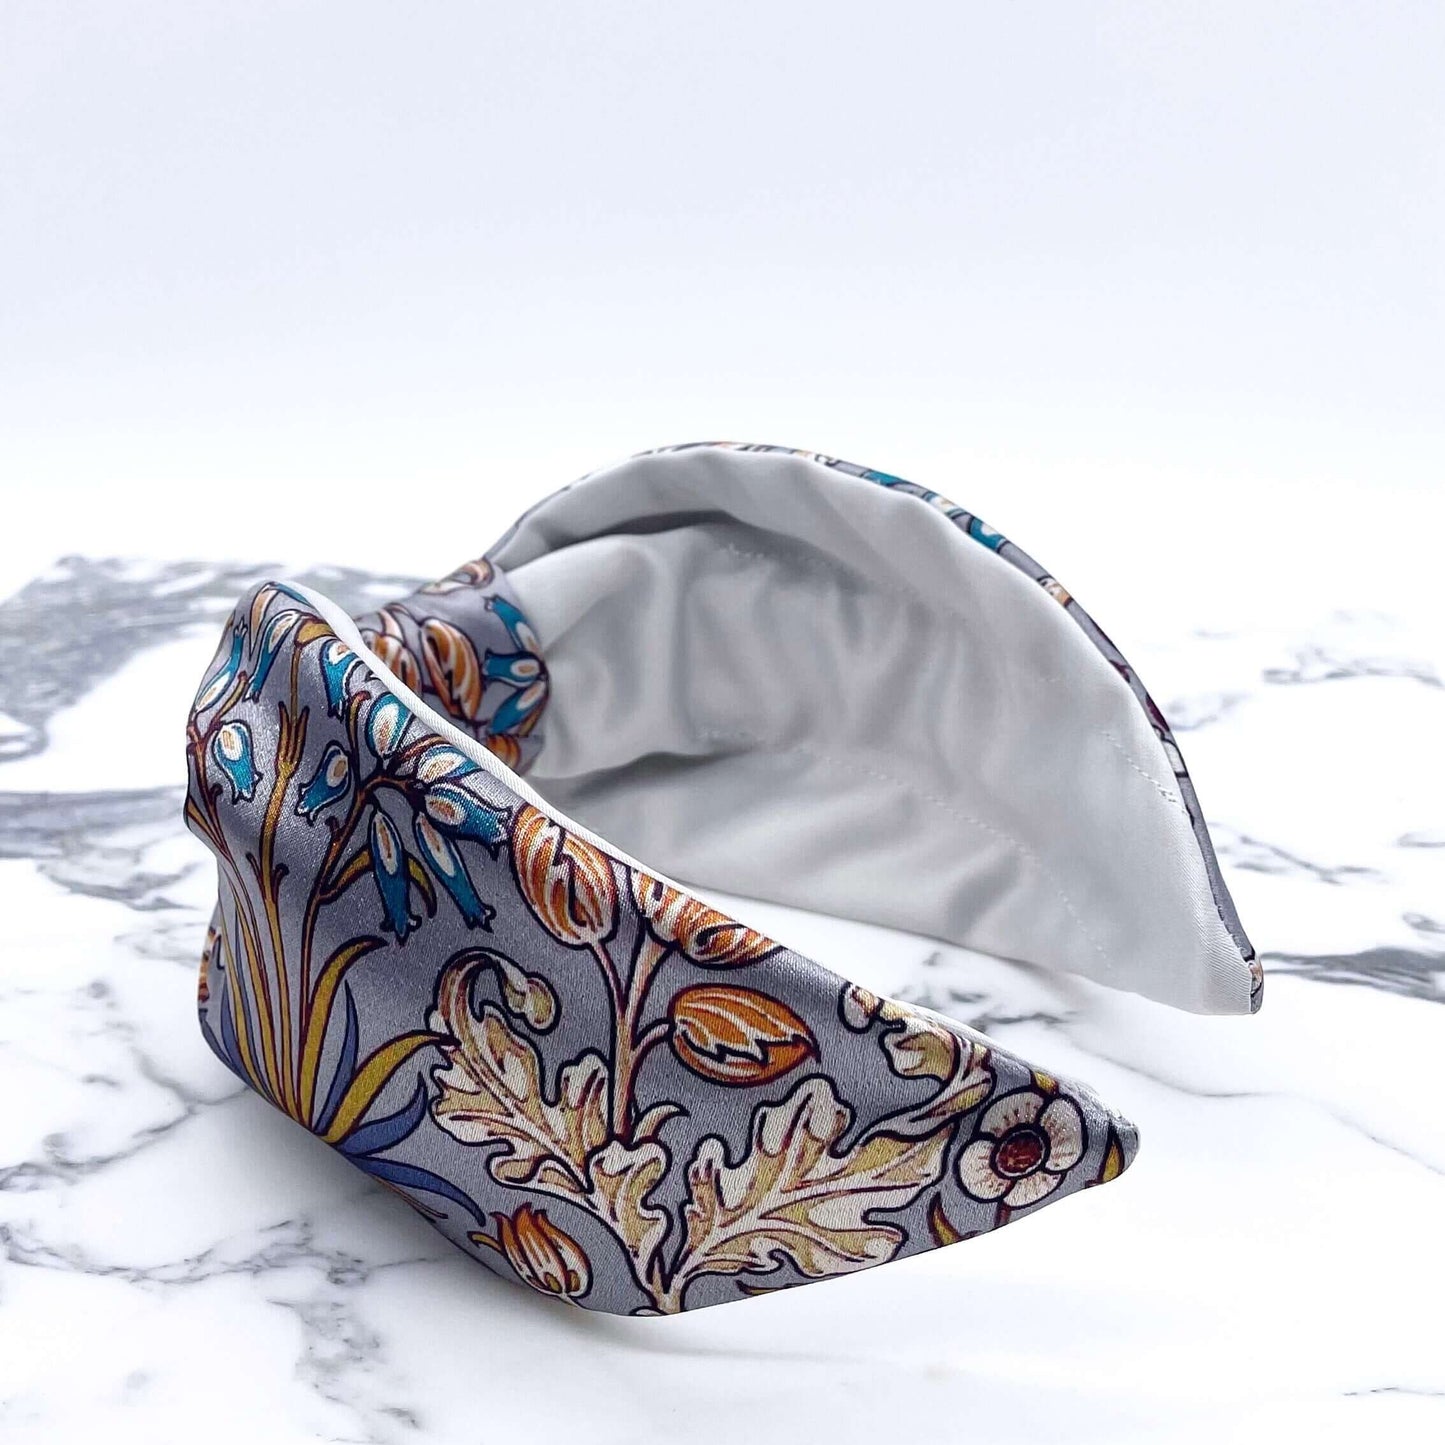 A beautiful grey, William Morris-inspired, patterned knot headband.